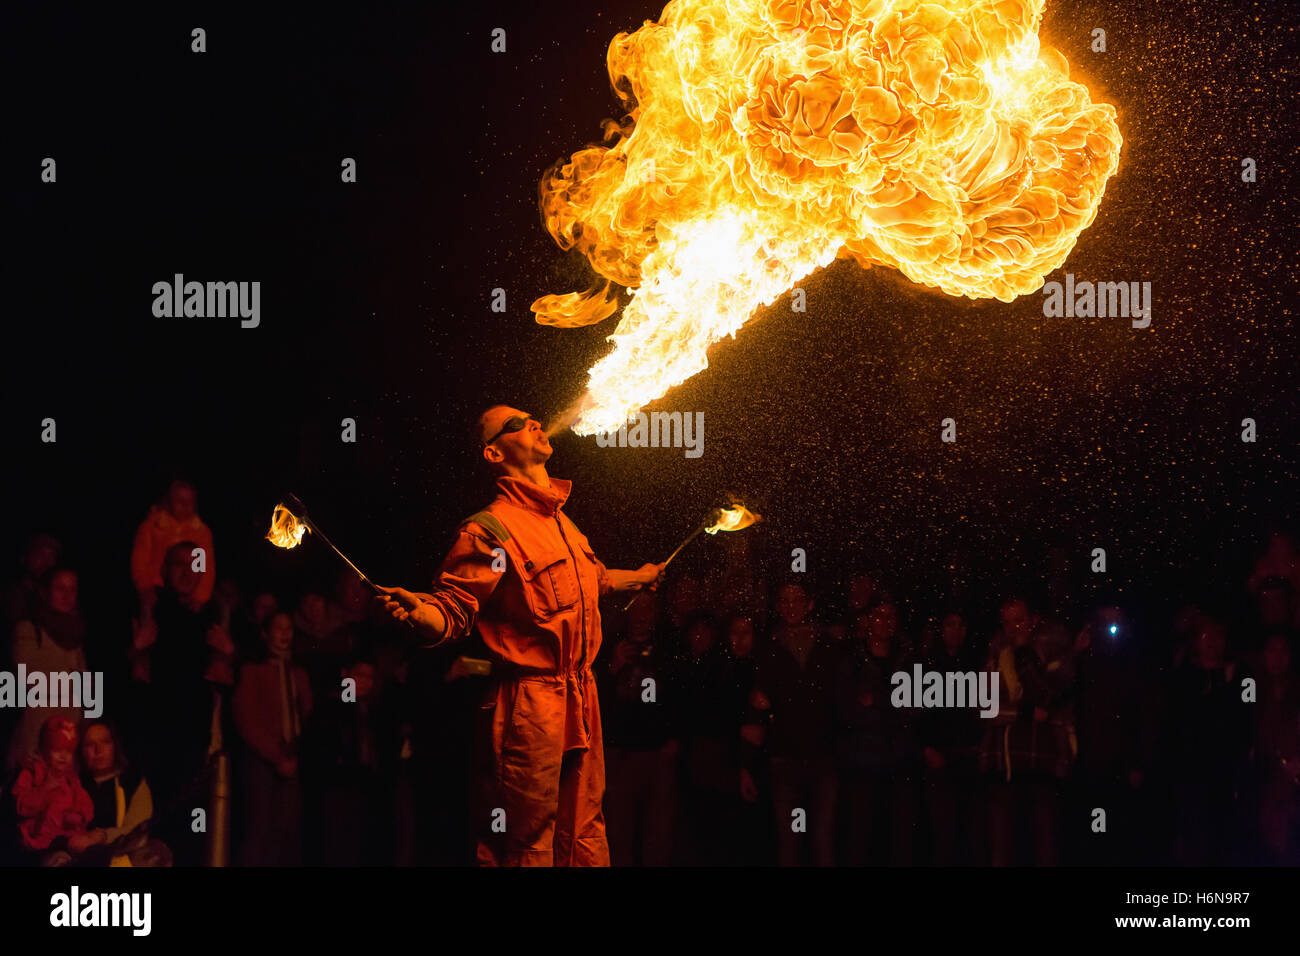 PRAGUE, CZECH REP - OCTOBER 15, 2016: Man fire-eater blowing a large flame from his mouth ( man spits fire) Stock Photo